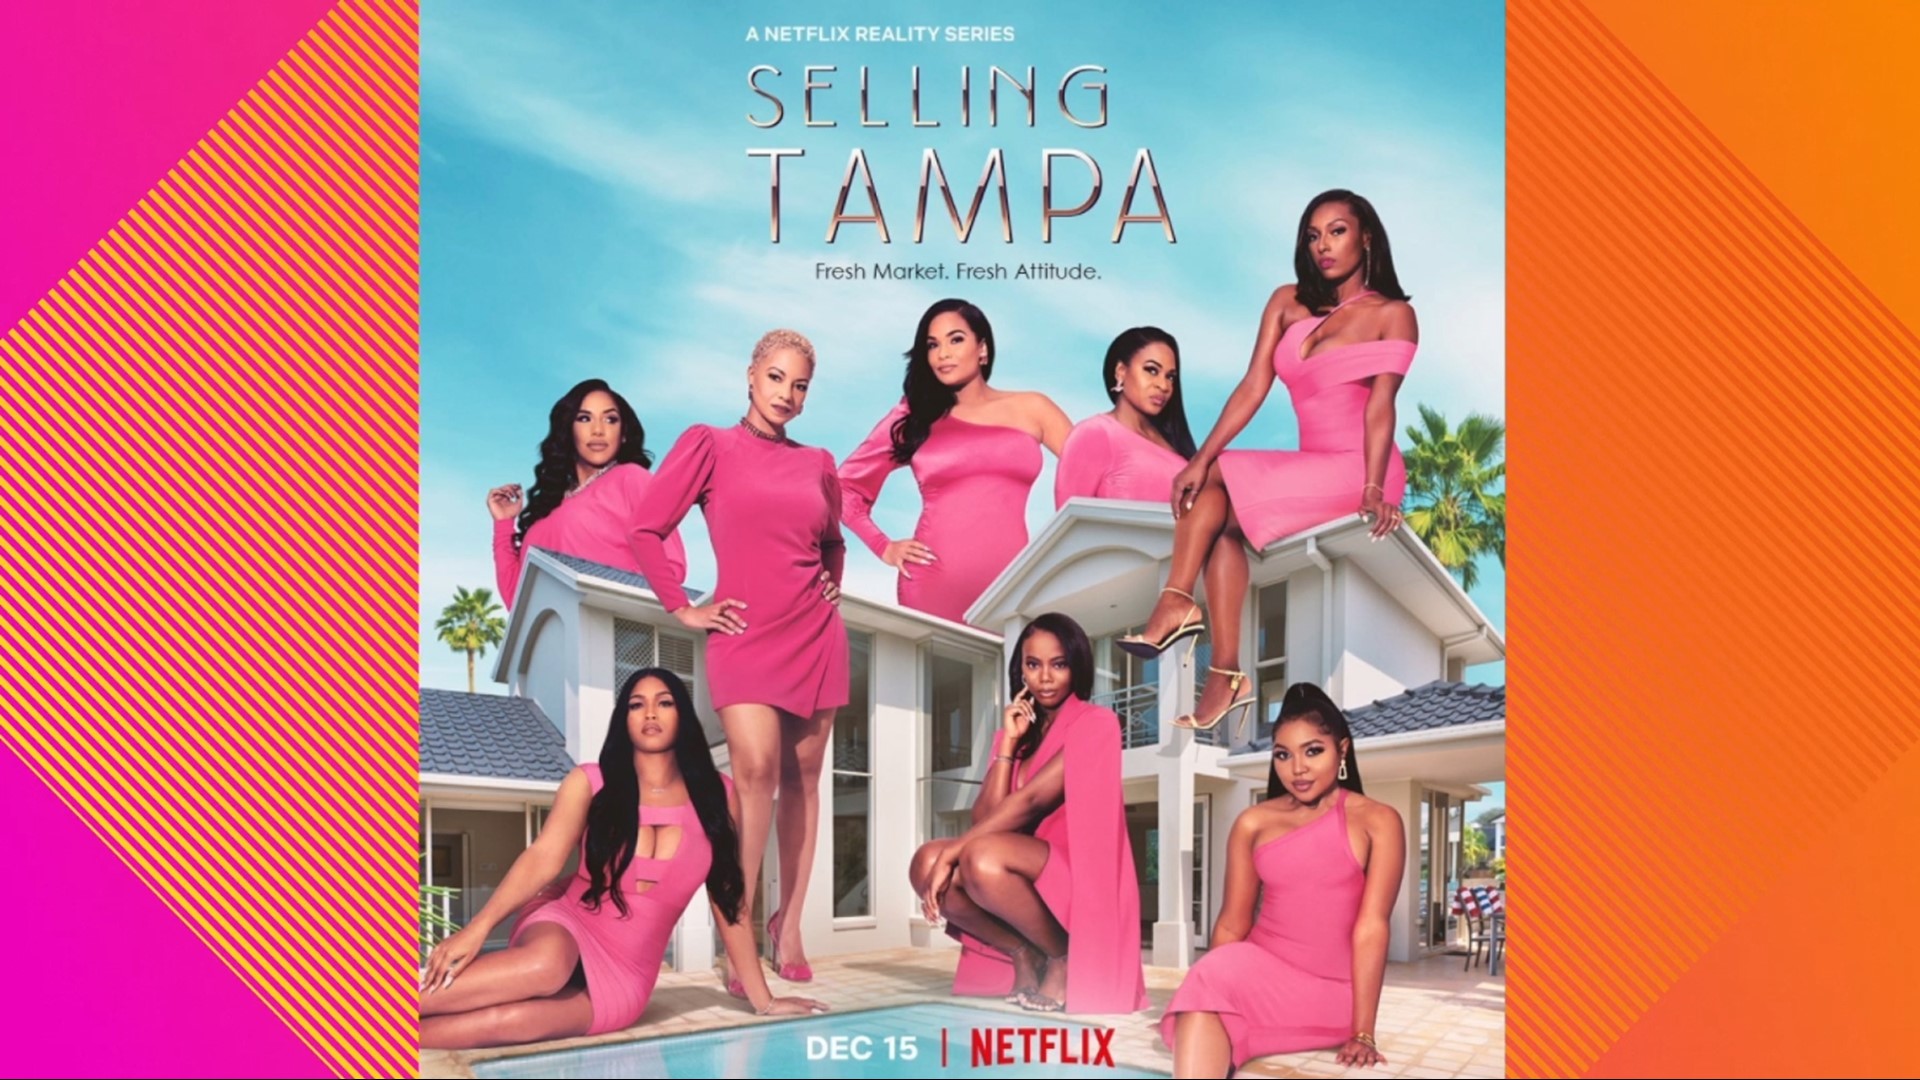 Tampa-based brokerage featured in new Netflix series